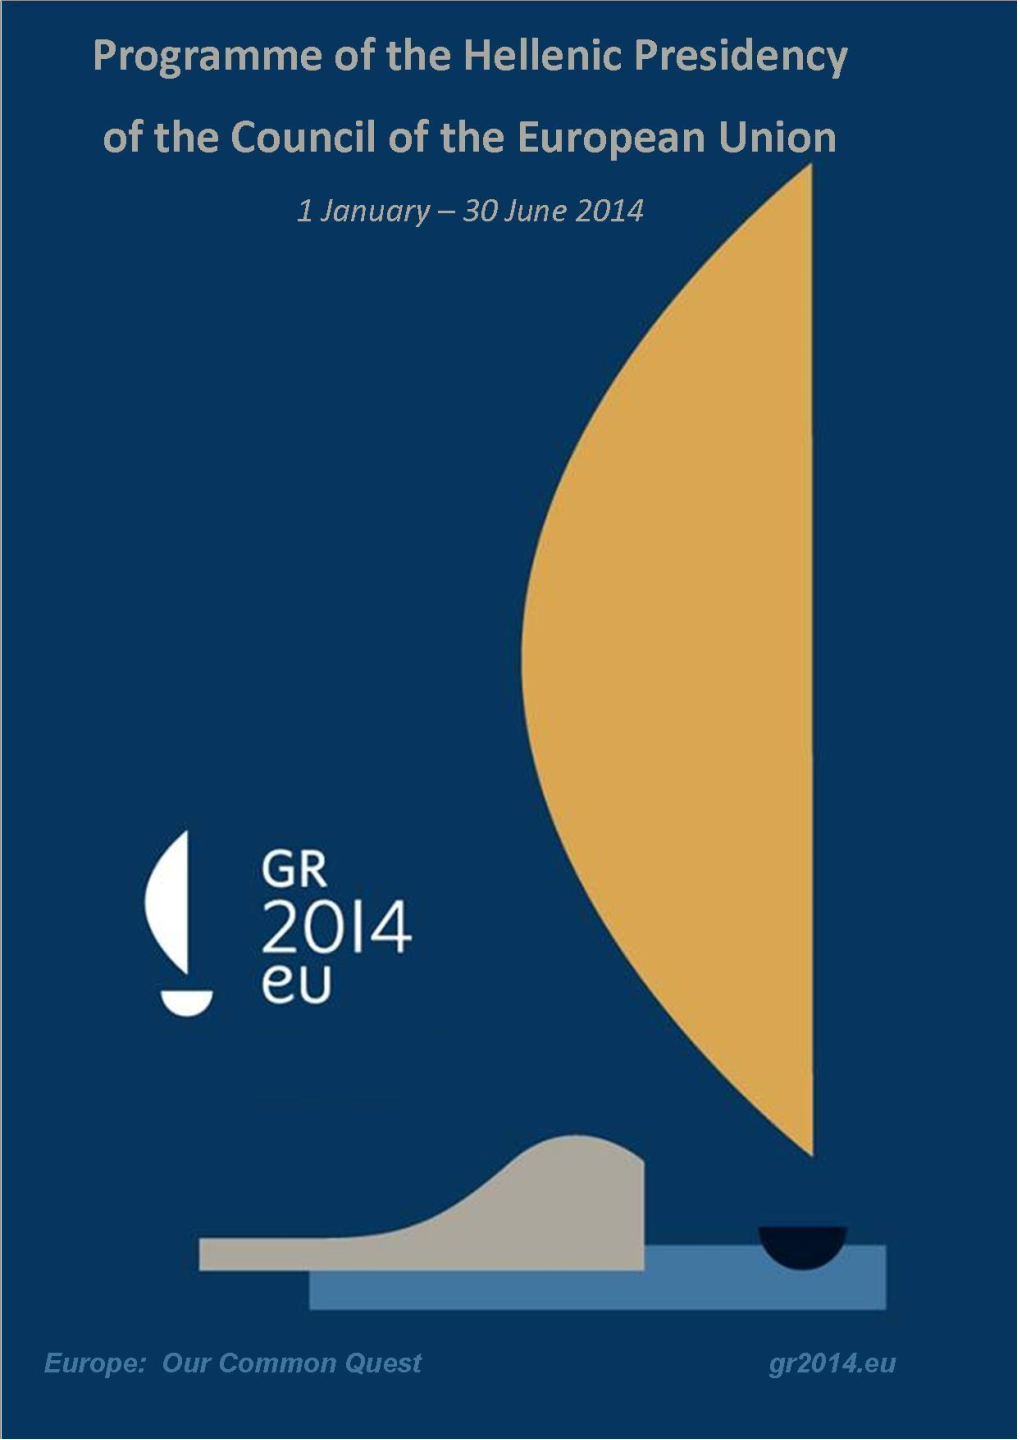 Programme of the Hellenic Presidency of the Council of the European Union